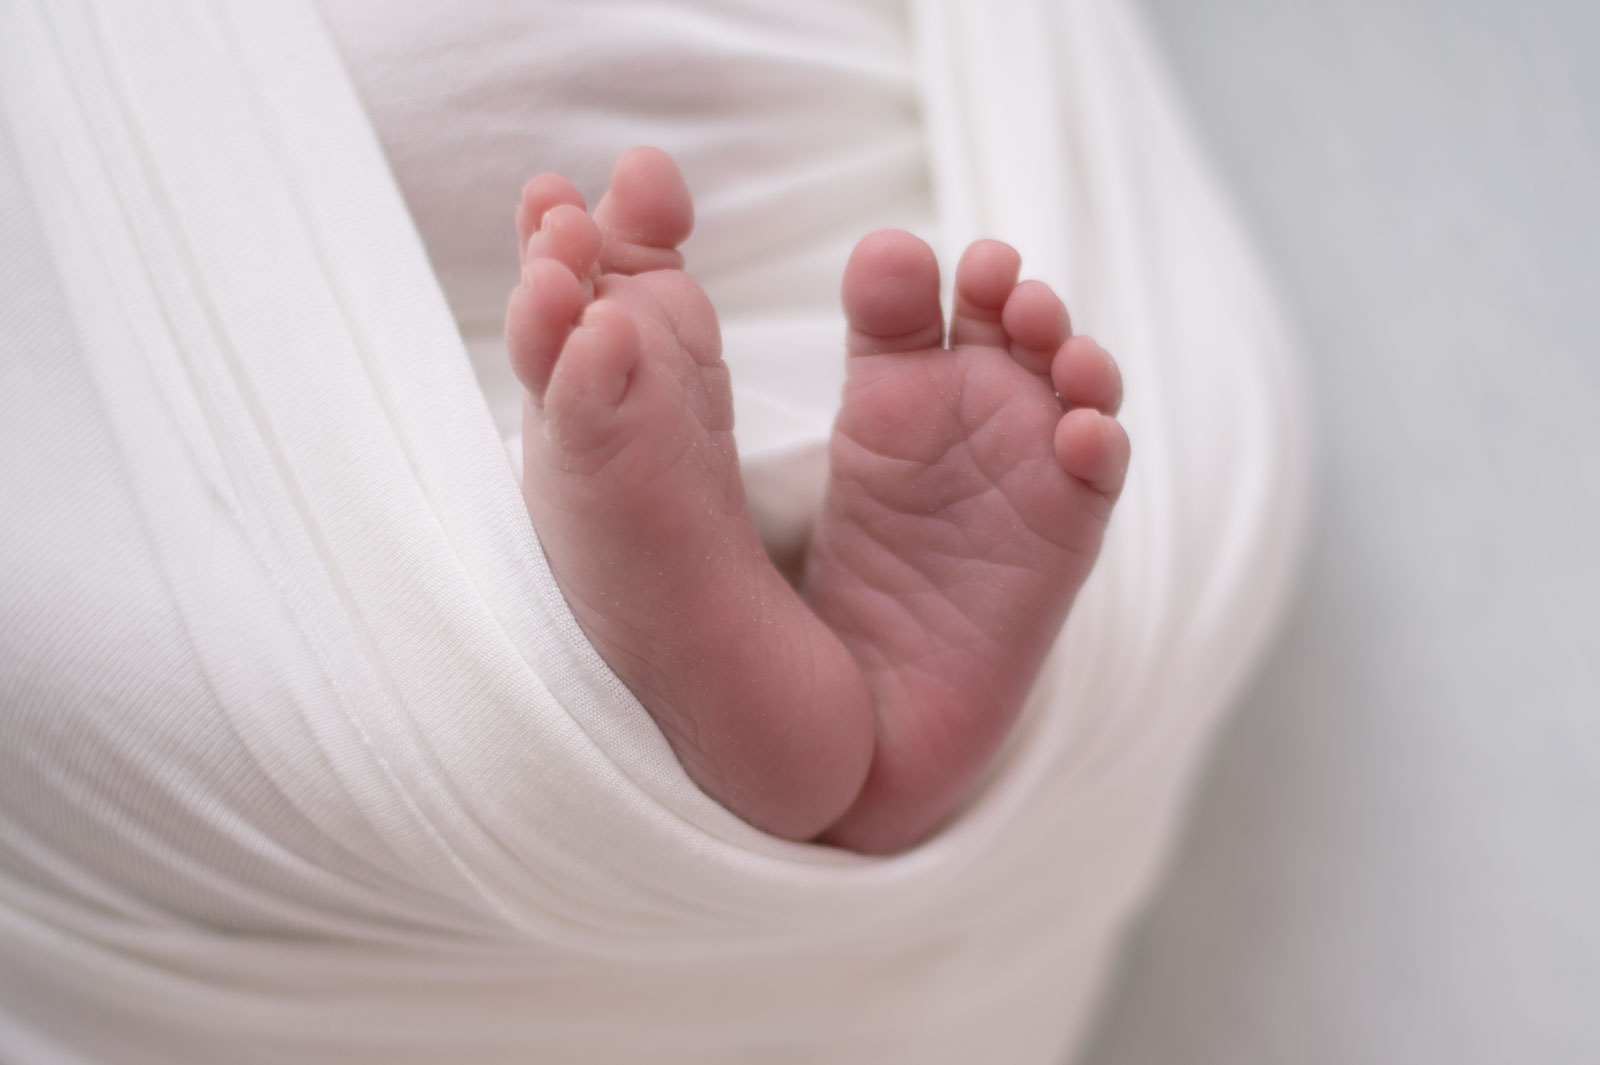 detail of baby feet wrapped in a white cloth